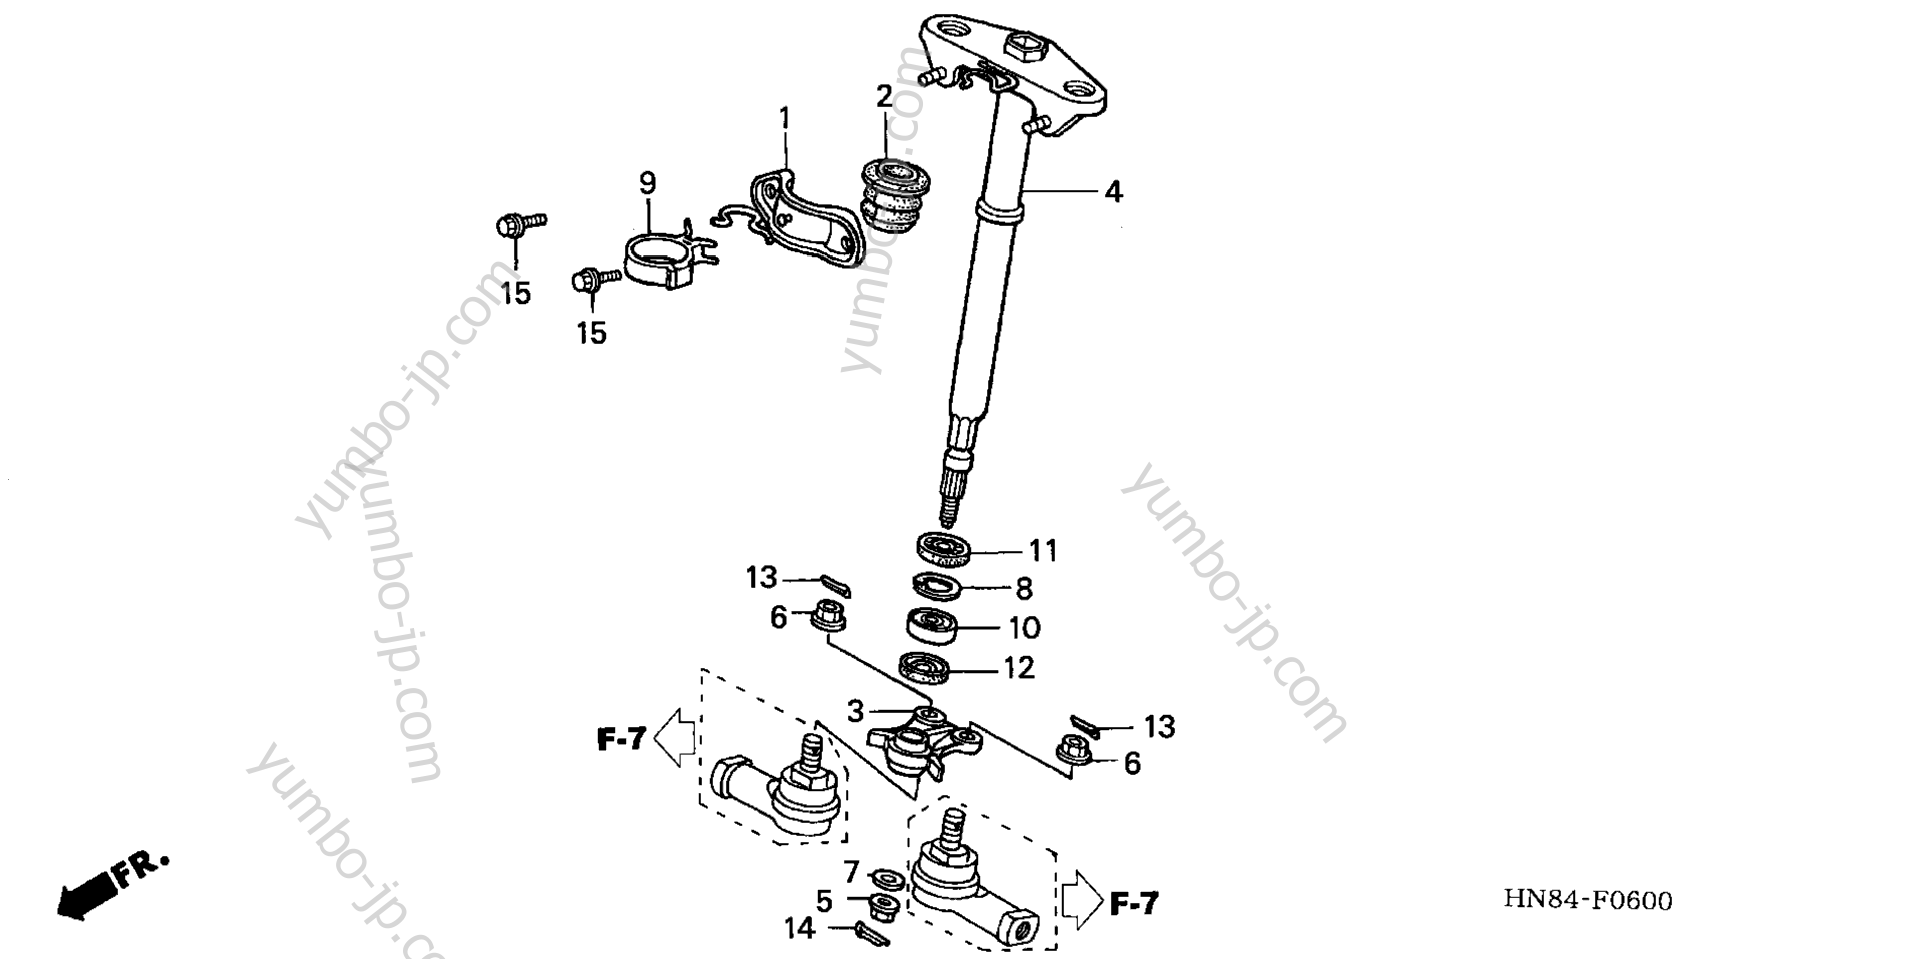 STEERING SHAFT for ATVs HONDA TRX650FA A 2003 year